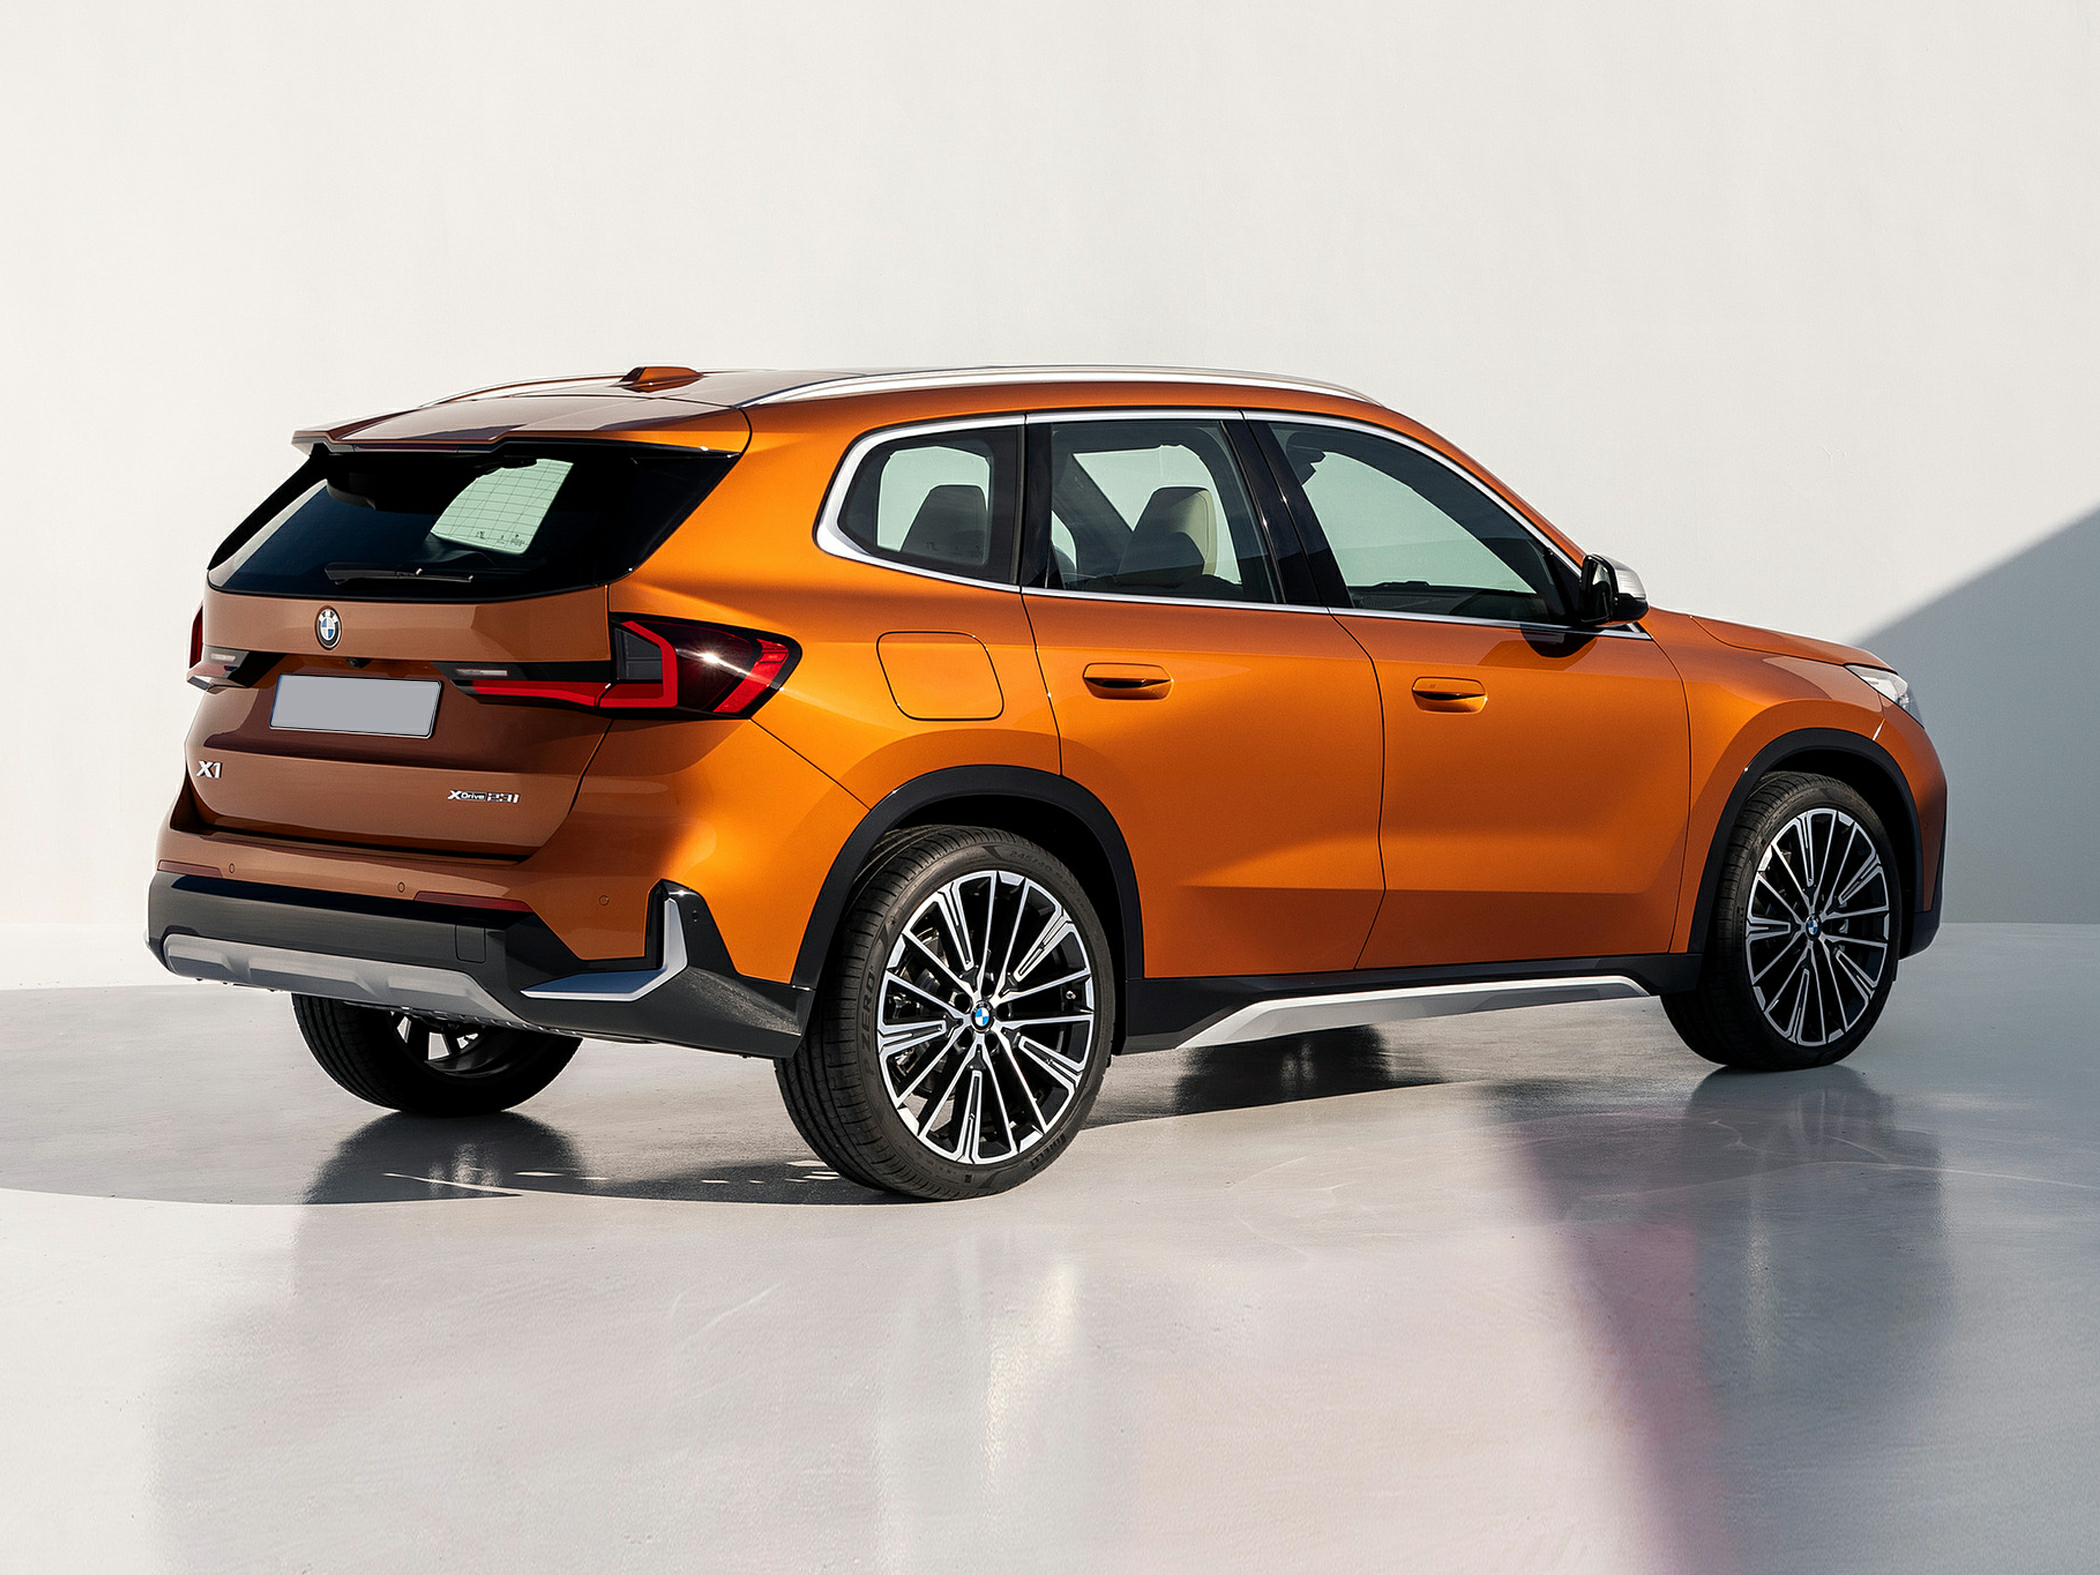 BMW X1 History: Generations, Features and More